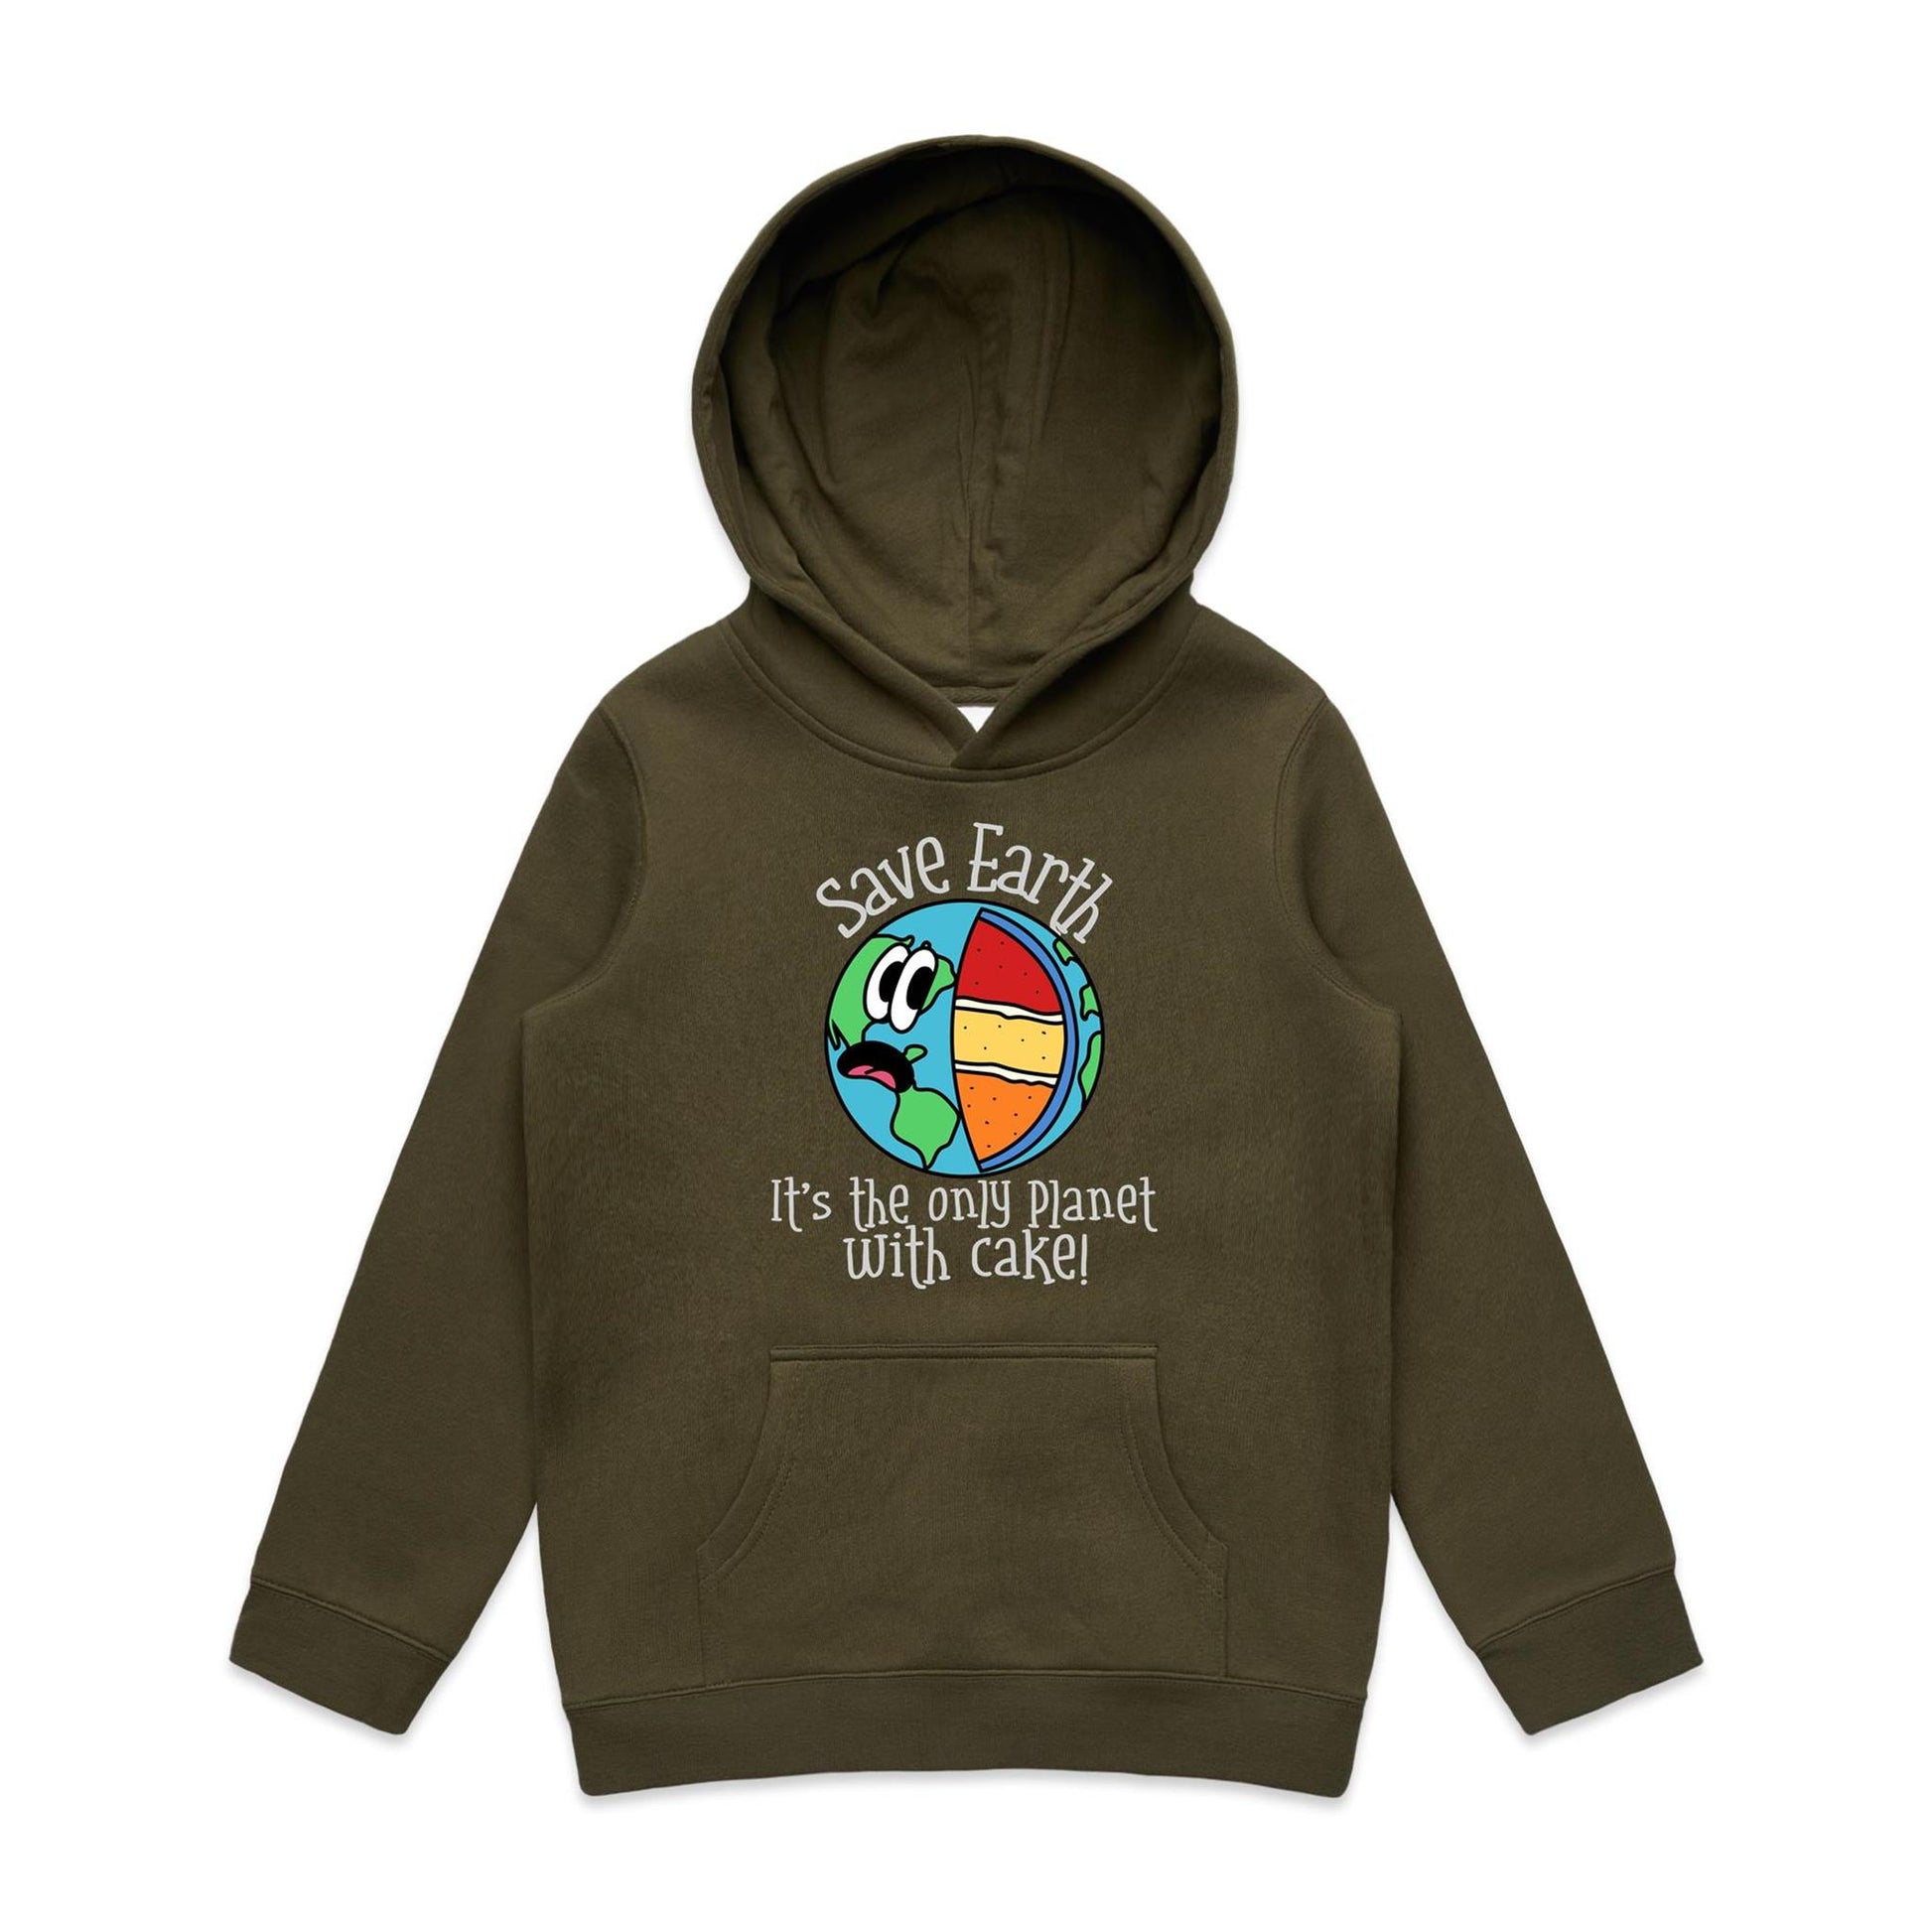 Save Earth, It's The Only Planet With Cake - Youth Supply Hood Army Kids Hoodie